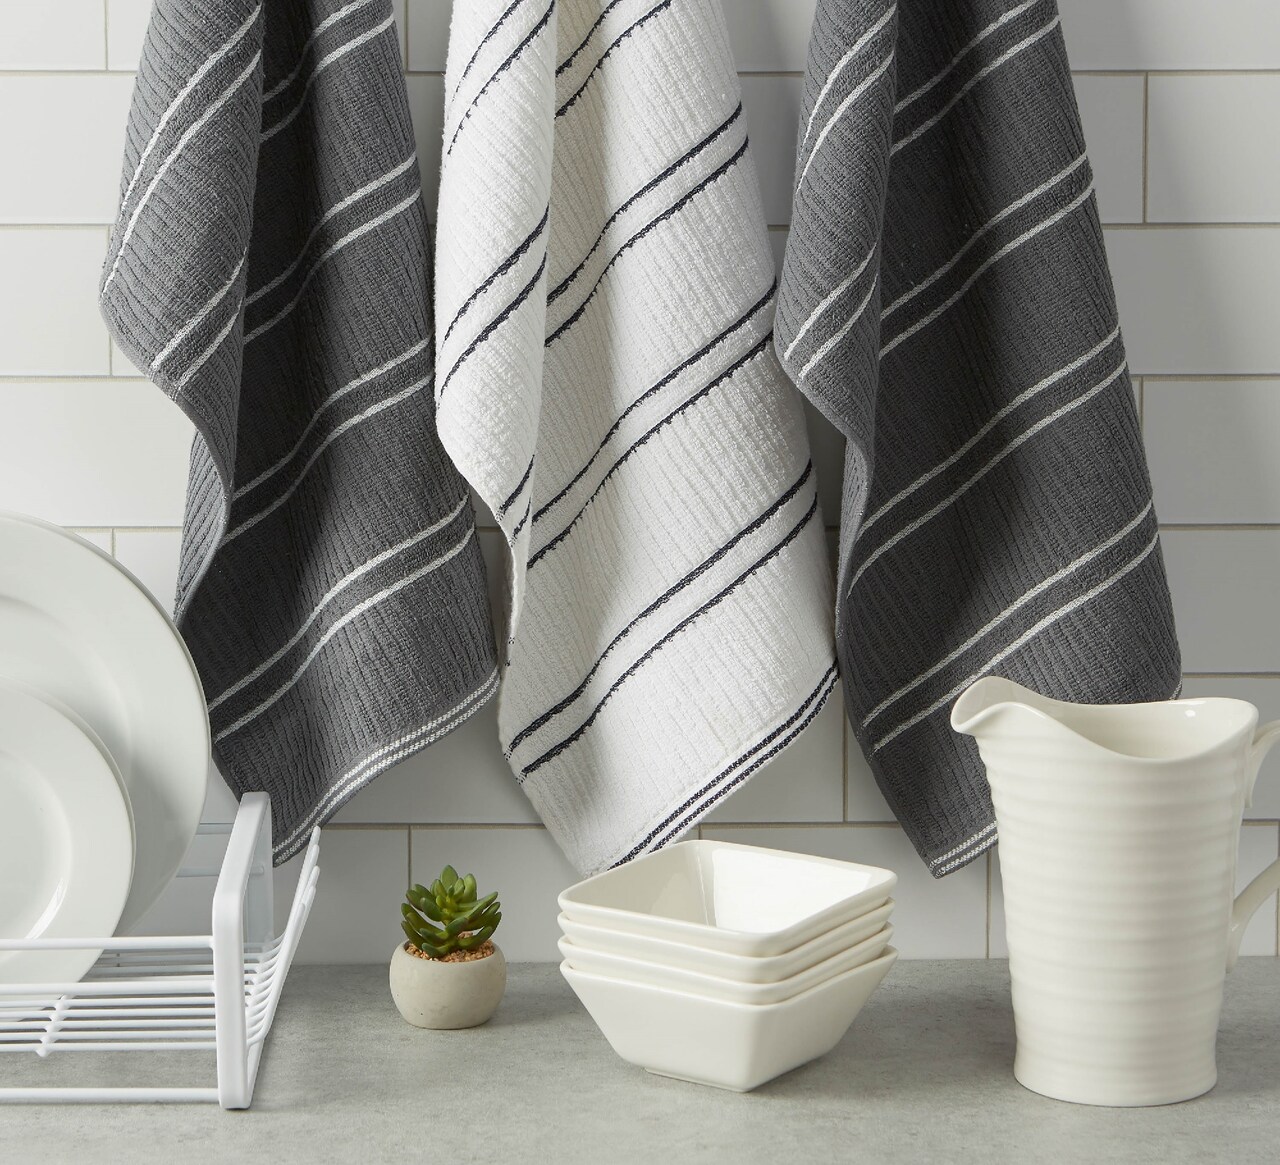 Contemporary Home Living Set of 6 Gray and White Terry Dish Towel, 16